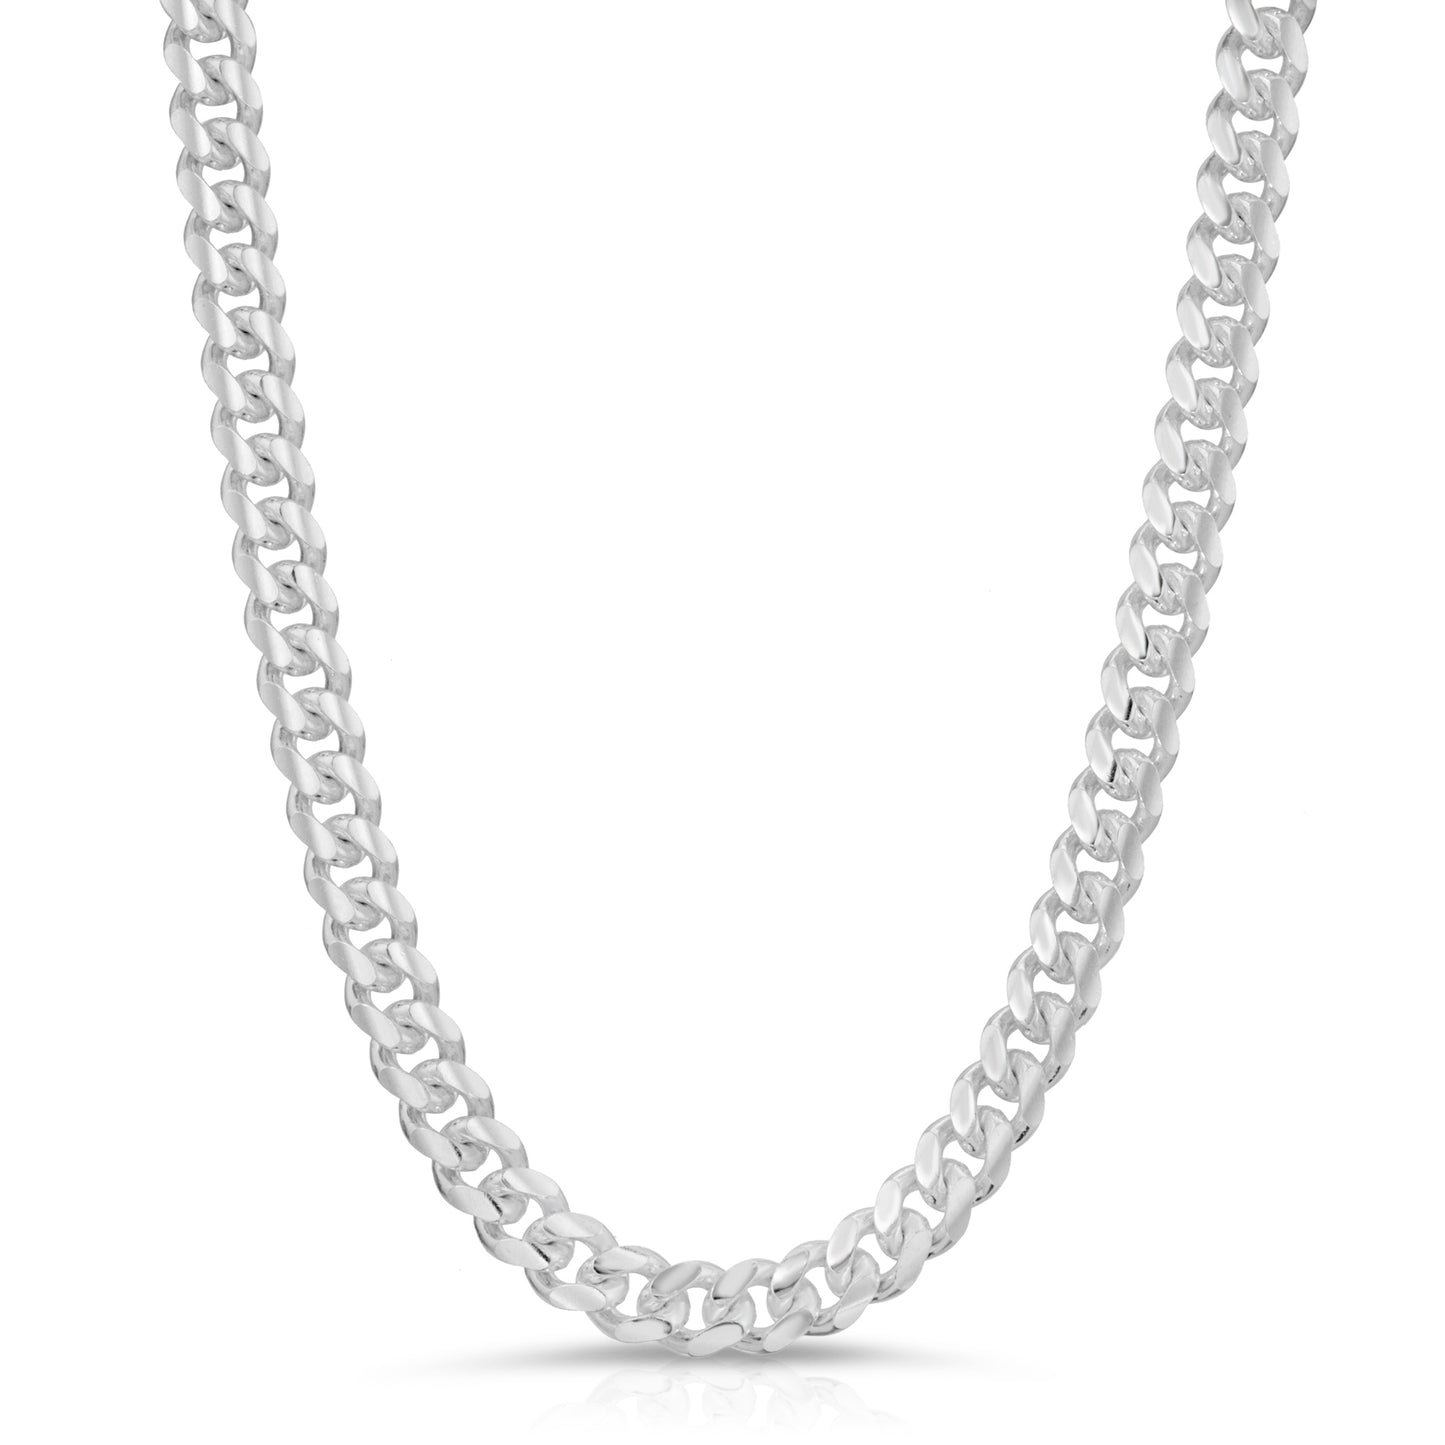 7mm Sterling Silver Miami Cuban Link Chain